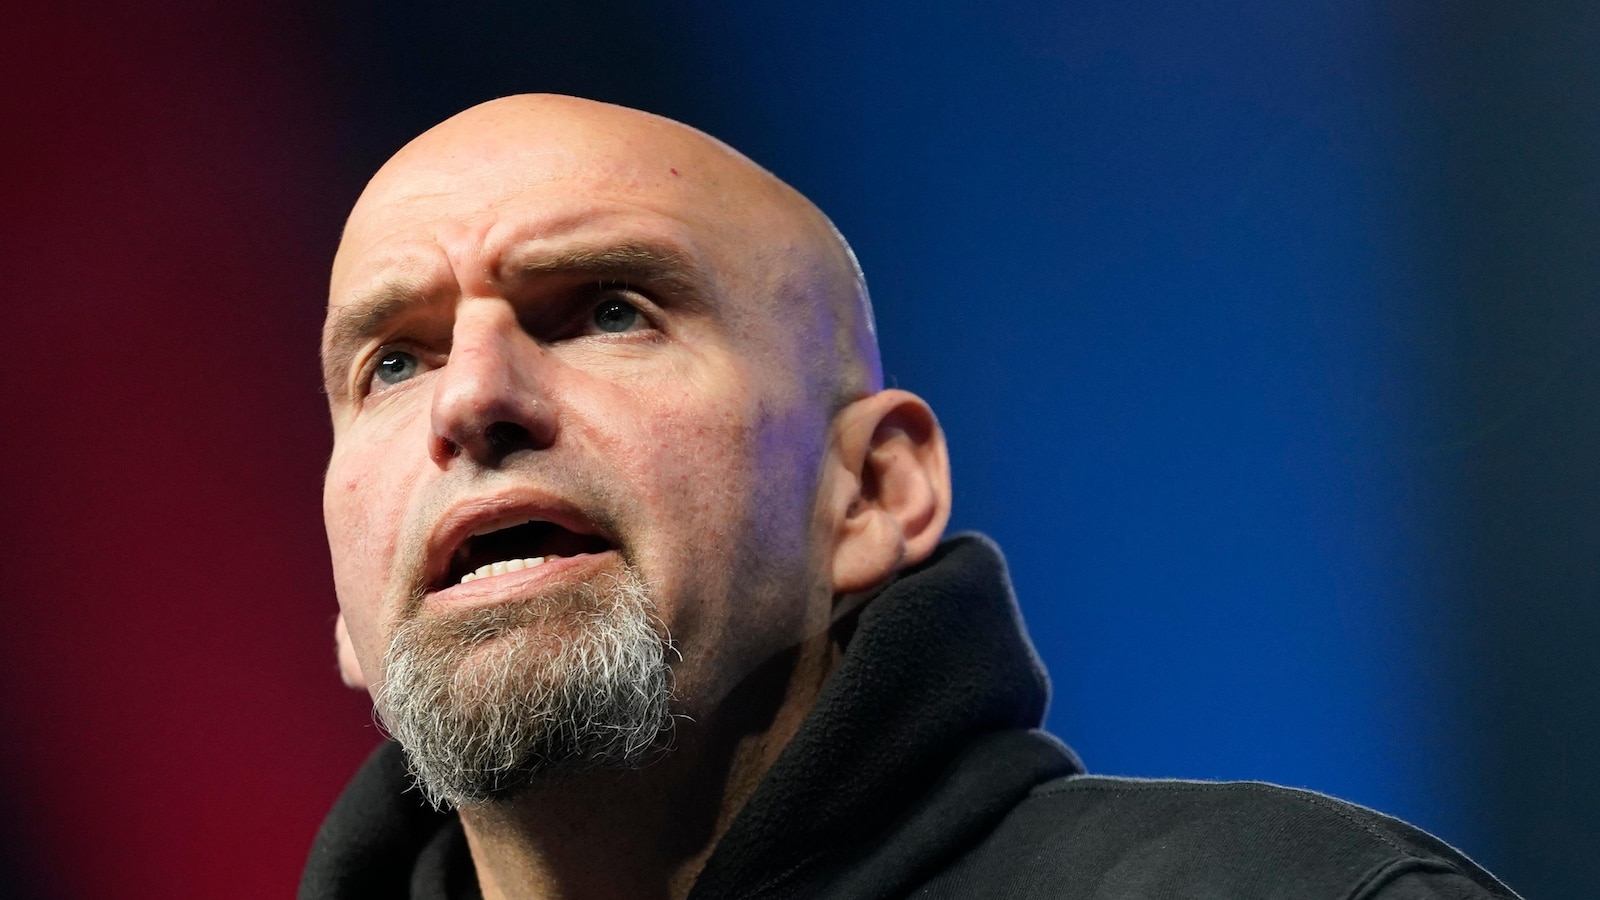 Sen. John Fetterman was at fault in car accident and seen going ‘high rate of speed,’ police say [Video]